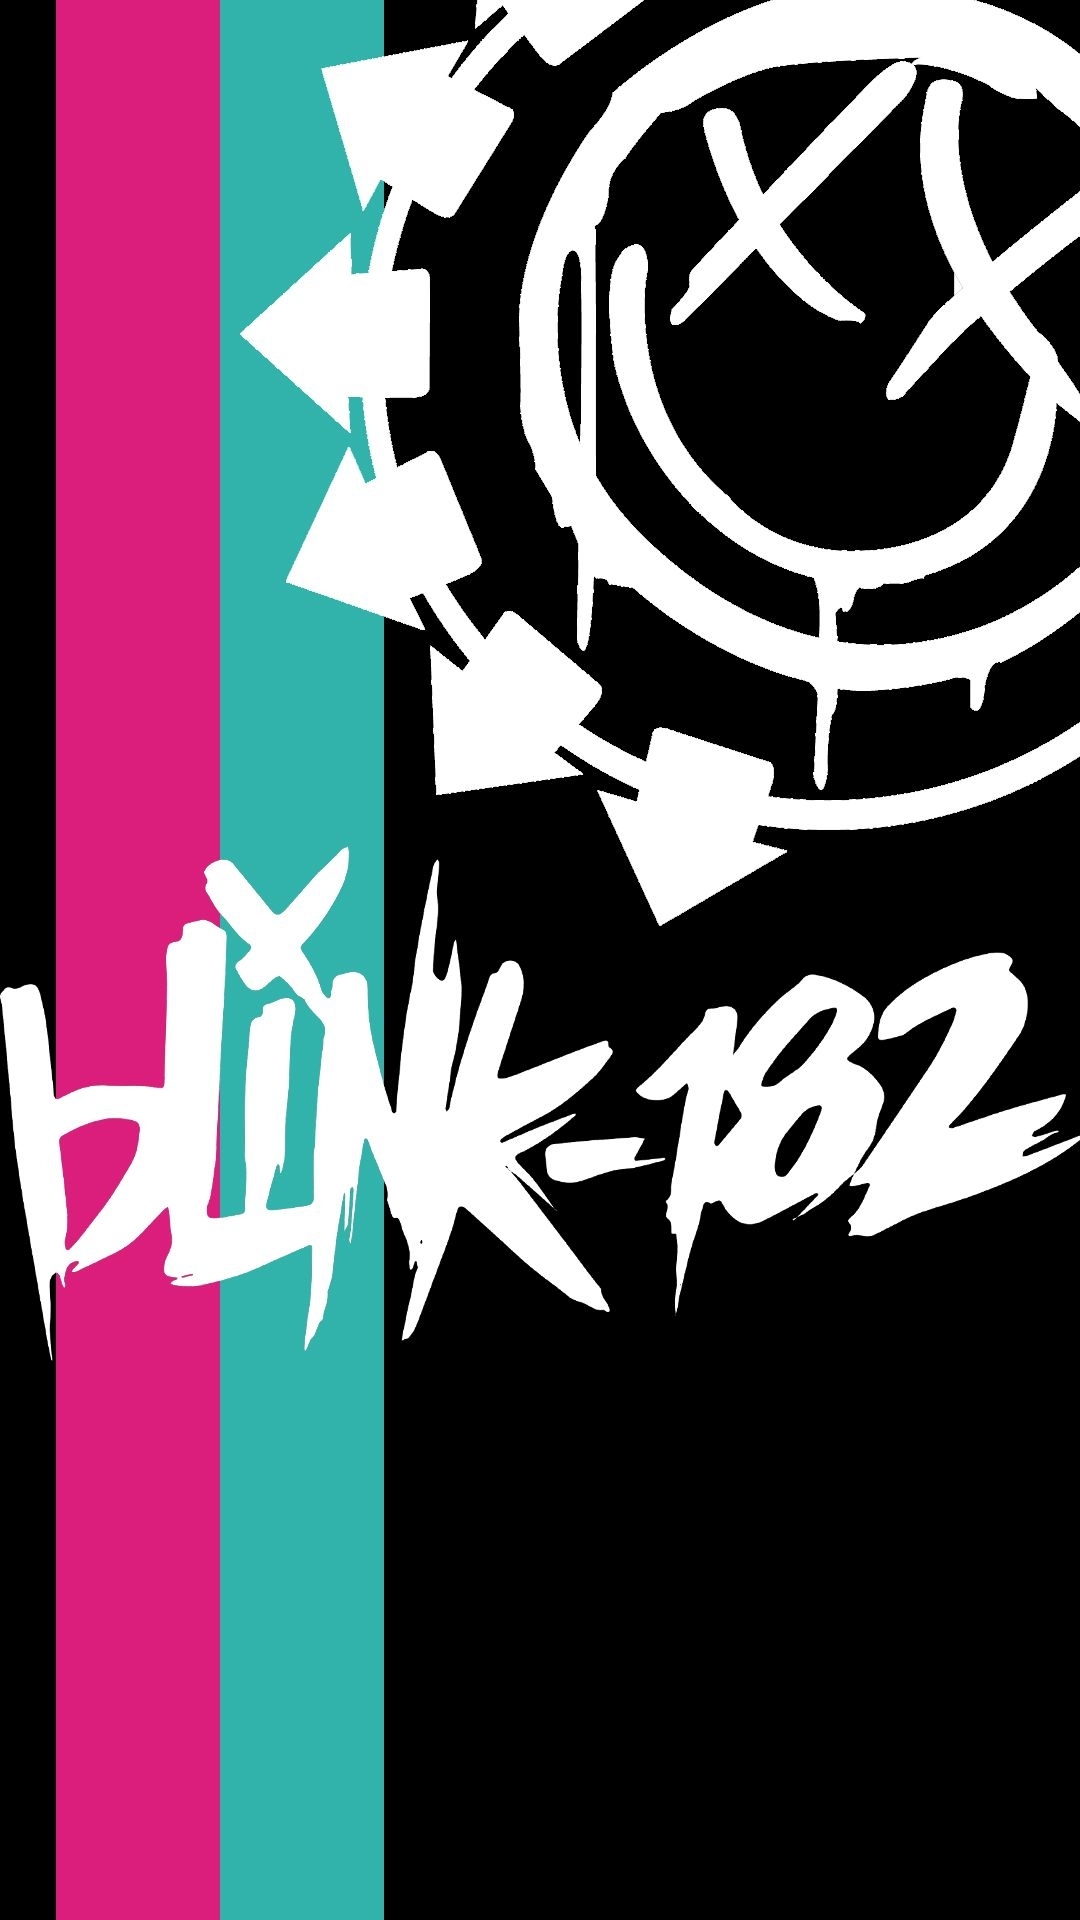 10 Top Blink 182 Iphone Wallpaper FULL HD 1920×1080 For PC Background